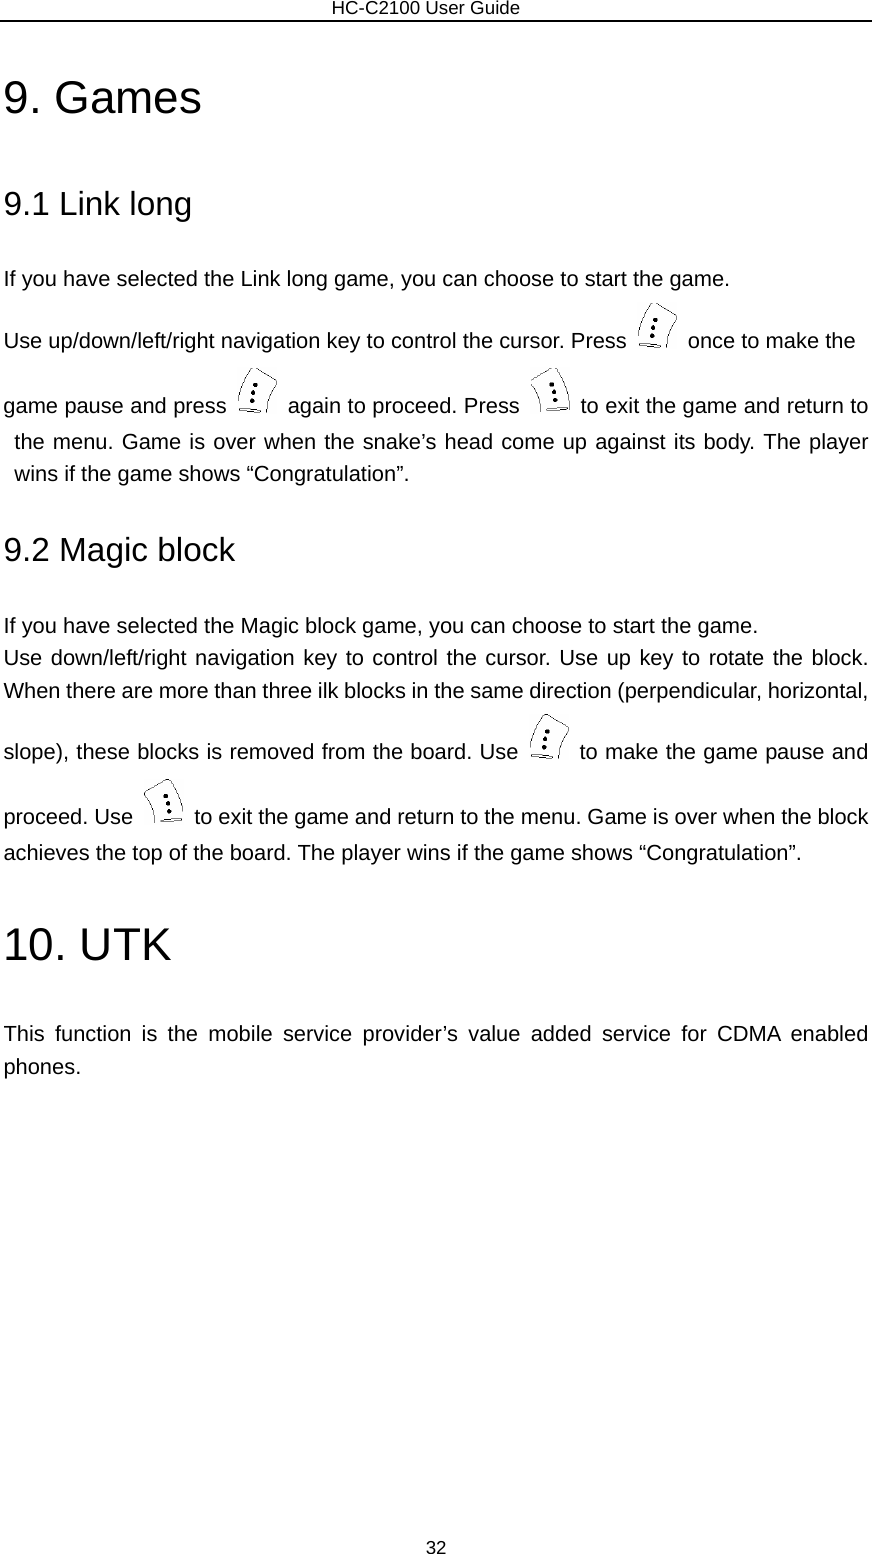                        HC-C2100 User Guide 9. Games 9.1 Link long If you have selected the Link long game, you can choose to start the game. Use up/down/left/right navigation key to control the cursor. Press    once to make the   game pause and press    again to proceed. Press    to exit the game and return to the menu. Game is over when the snake’s head come up against its body. The player wins if the game shows “Congratulation”.   9.2 Magic block If you have selected the Magic block game, you can choose to start the game. Use down/left/right navigation key to control the cursor. Use up key to rotate the block. When there are more than three ilk blocks in the same direction (perpendicular, horizontal, slope), these blocks is removed from the board. Use    to make the game pause and proceed. Use    to exit the game and return to the menu. Game is over when the block achieves the top of the board. The player wins if the game shows “Congratulation”. 10. UTK This function is the mobile service provider’s value added service for CDMA enabled phones. 32 